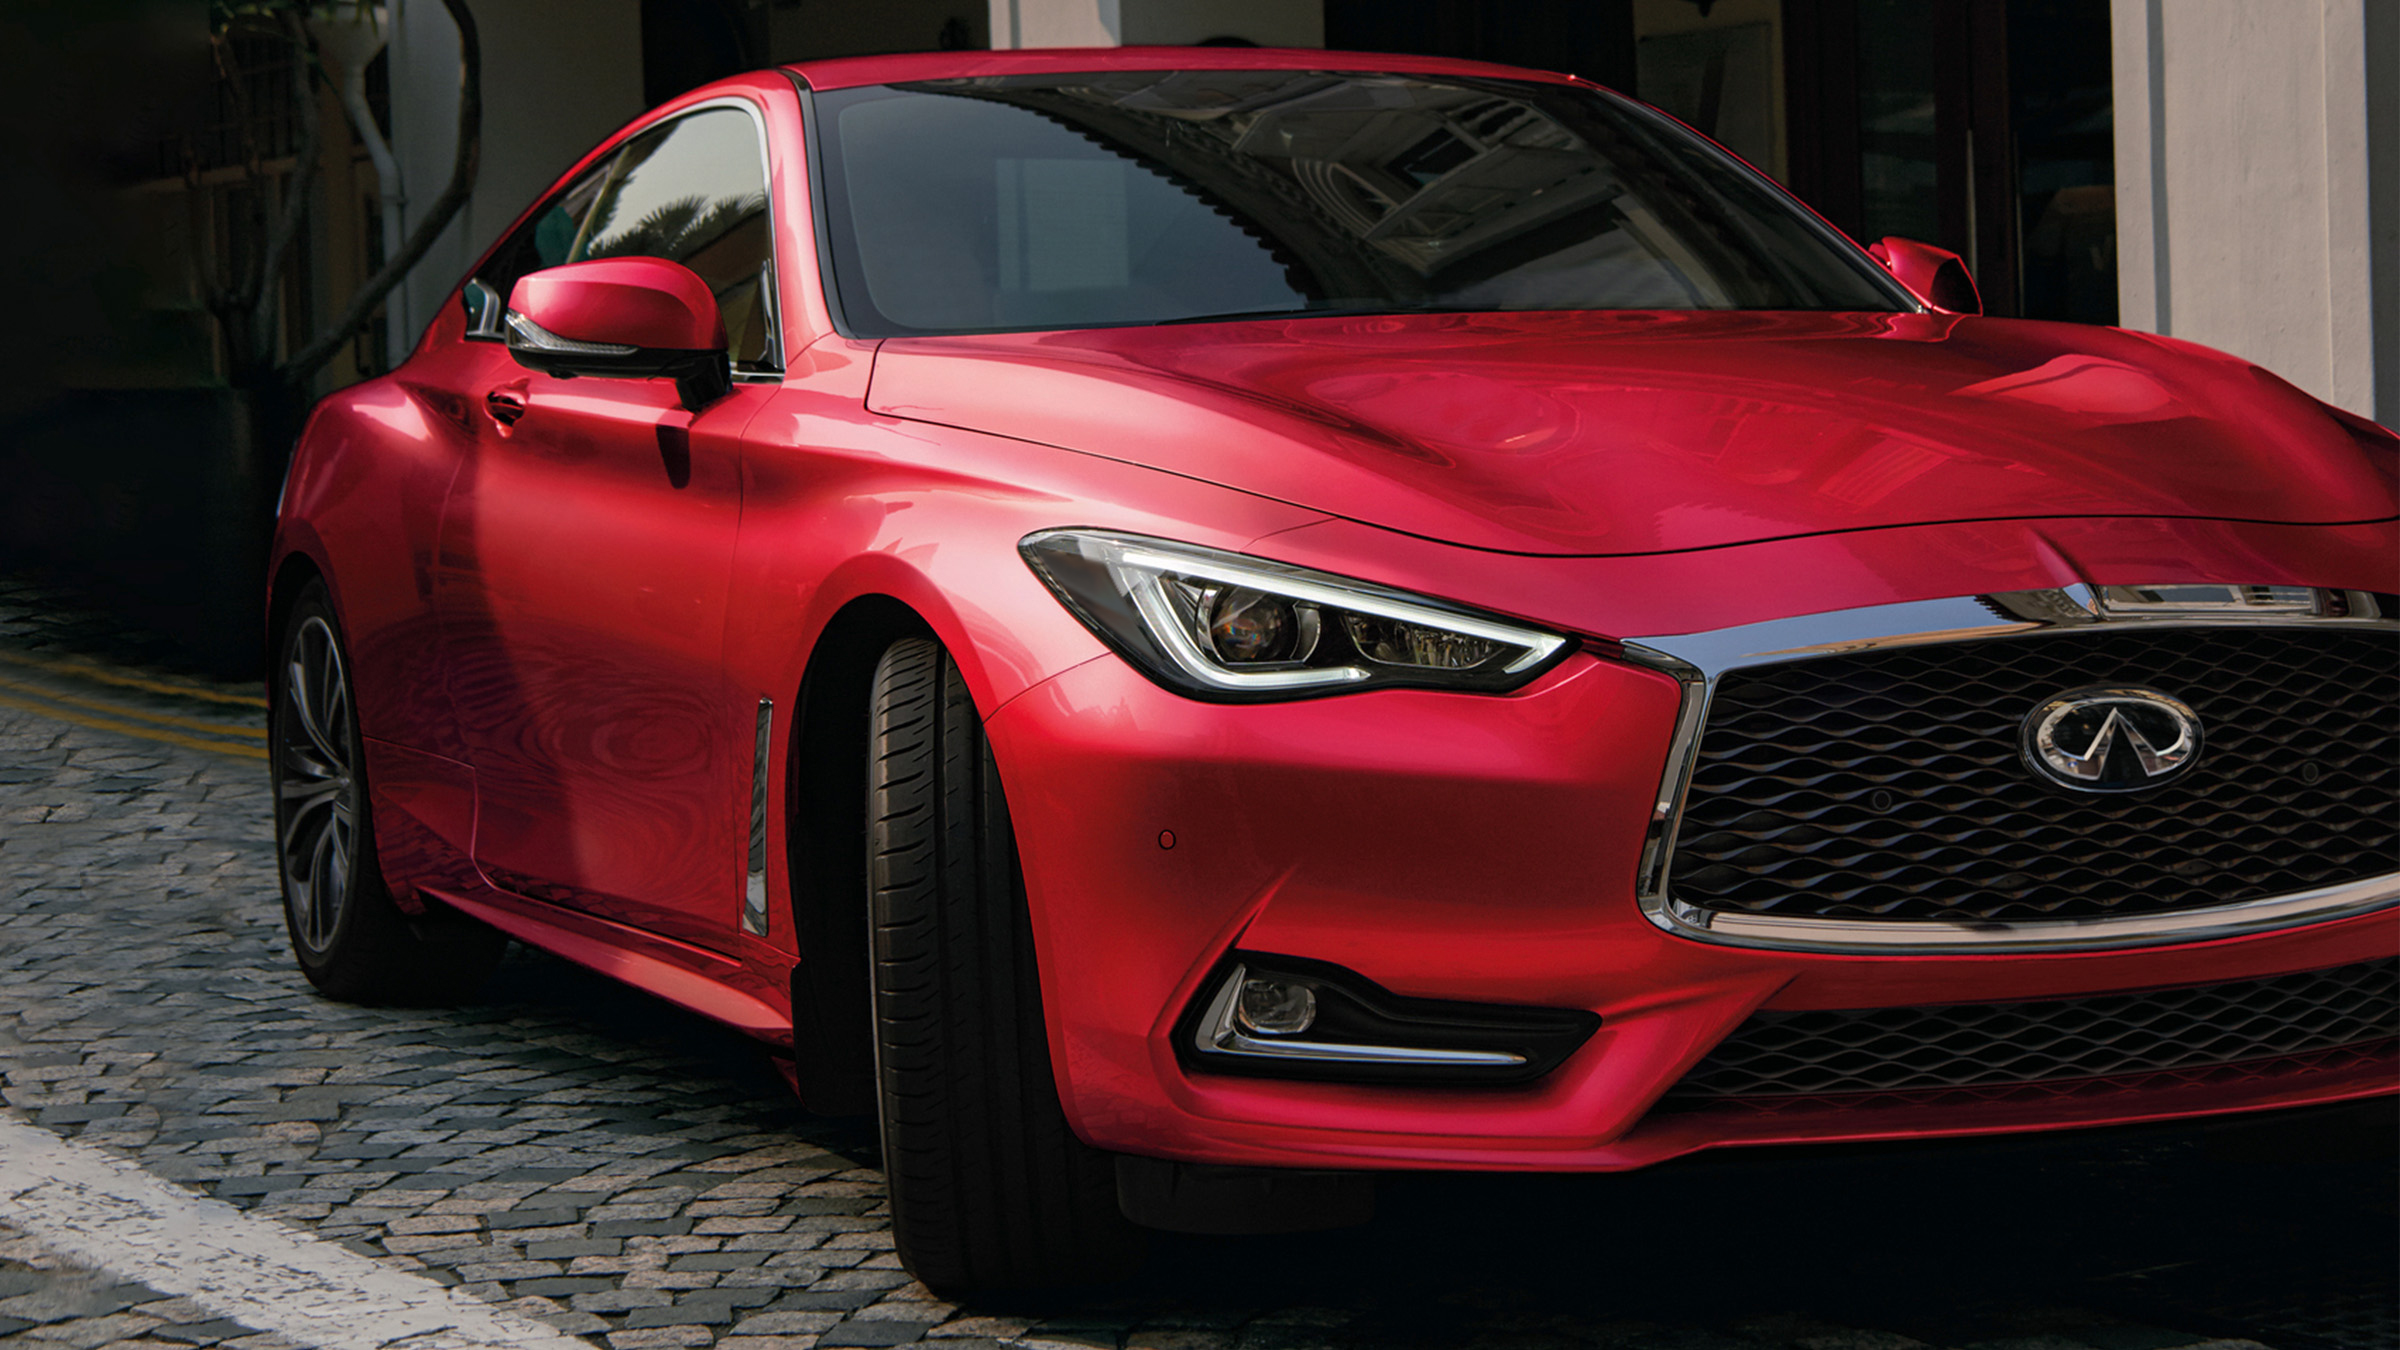 2022 INFINITI Q60 red car parked on the road.